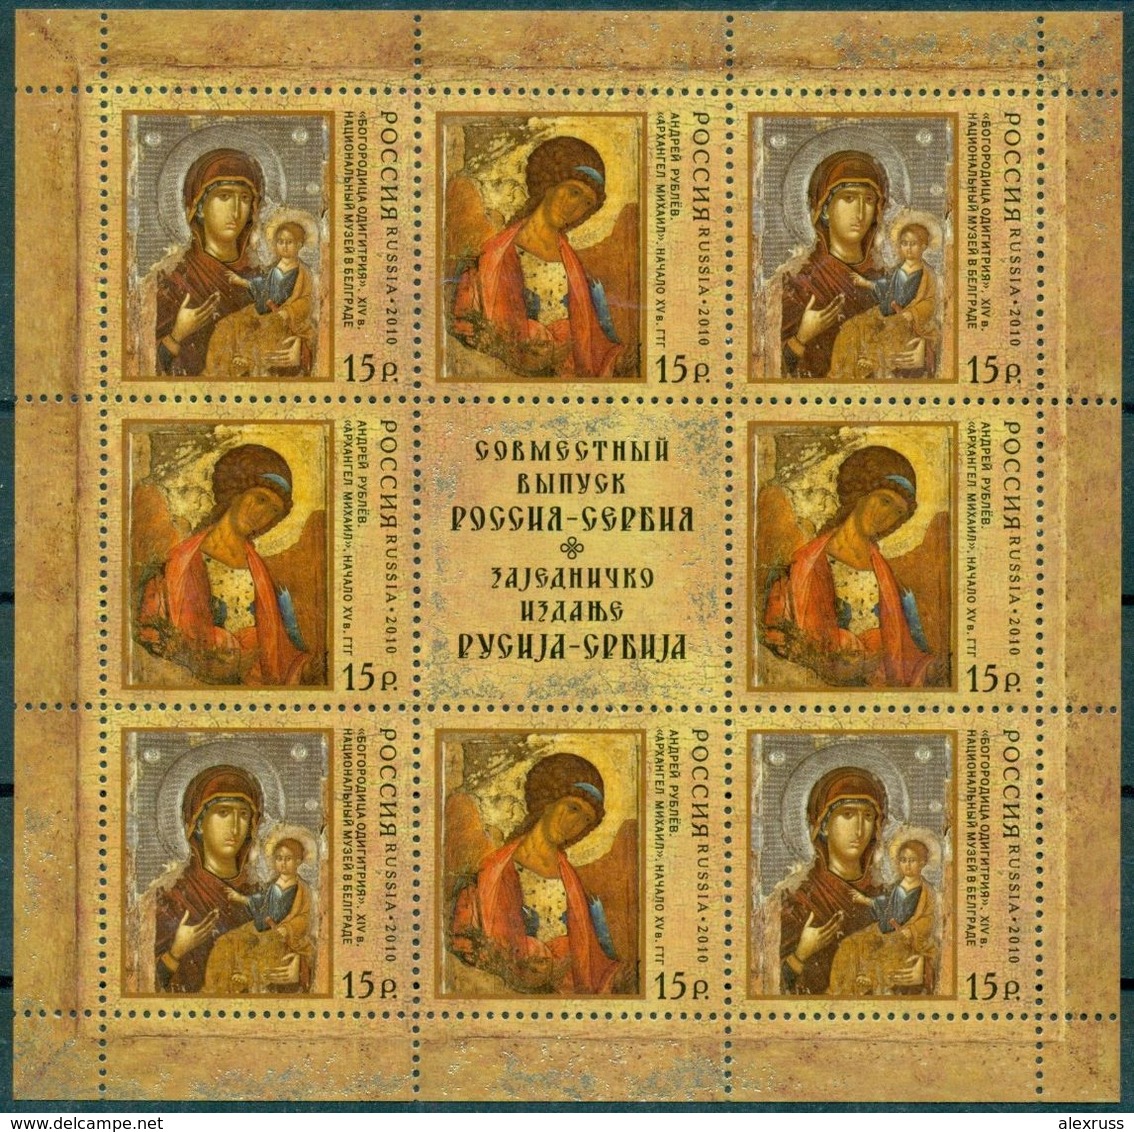 Russia 2010,Miniature Sheet Join Issue W/Serbia,Art Religious Icons Of Russia & Serbia,Scott # 7221,VF MNH** (OR-3) - Neufs